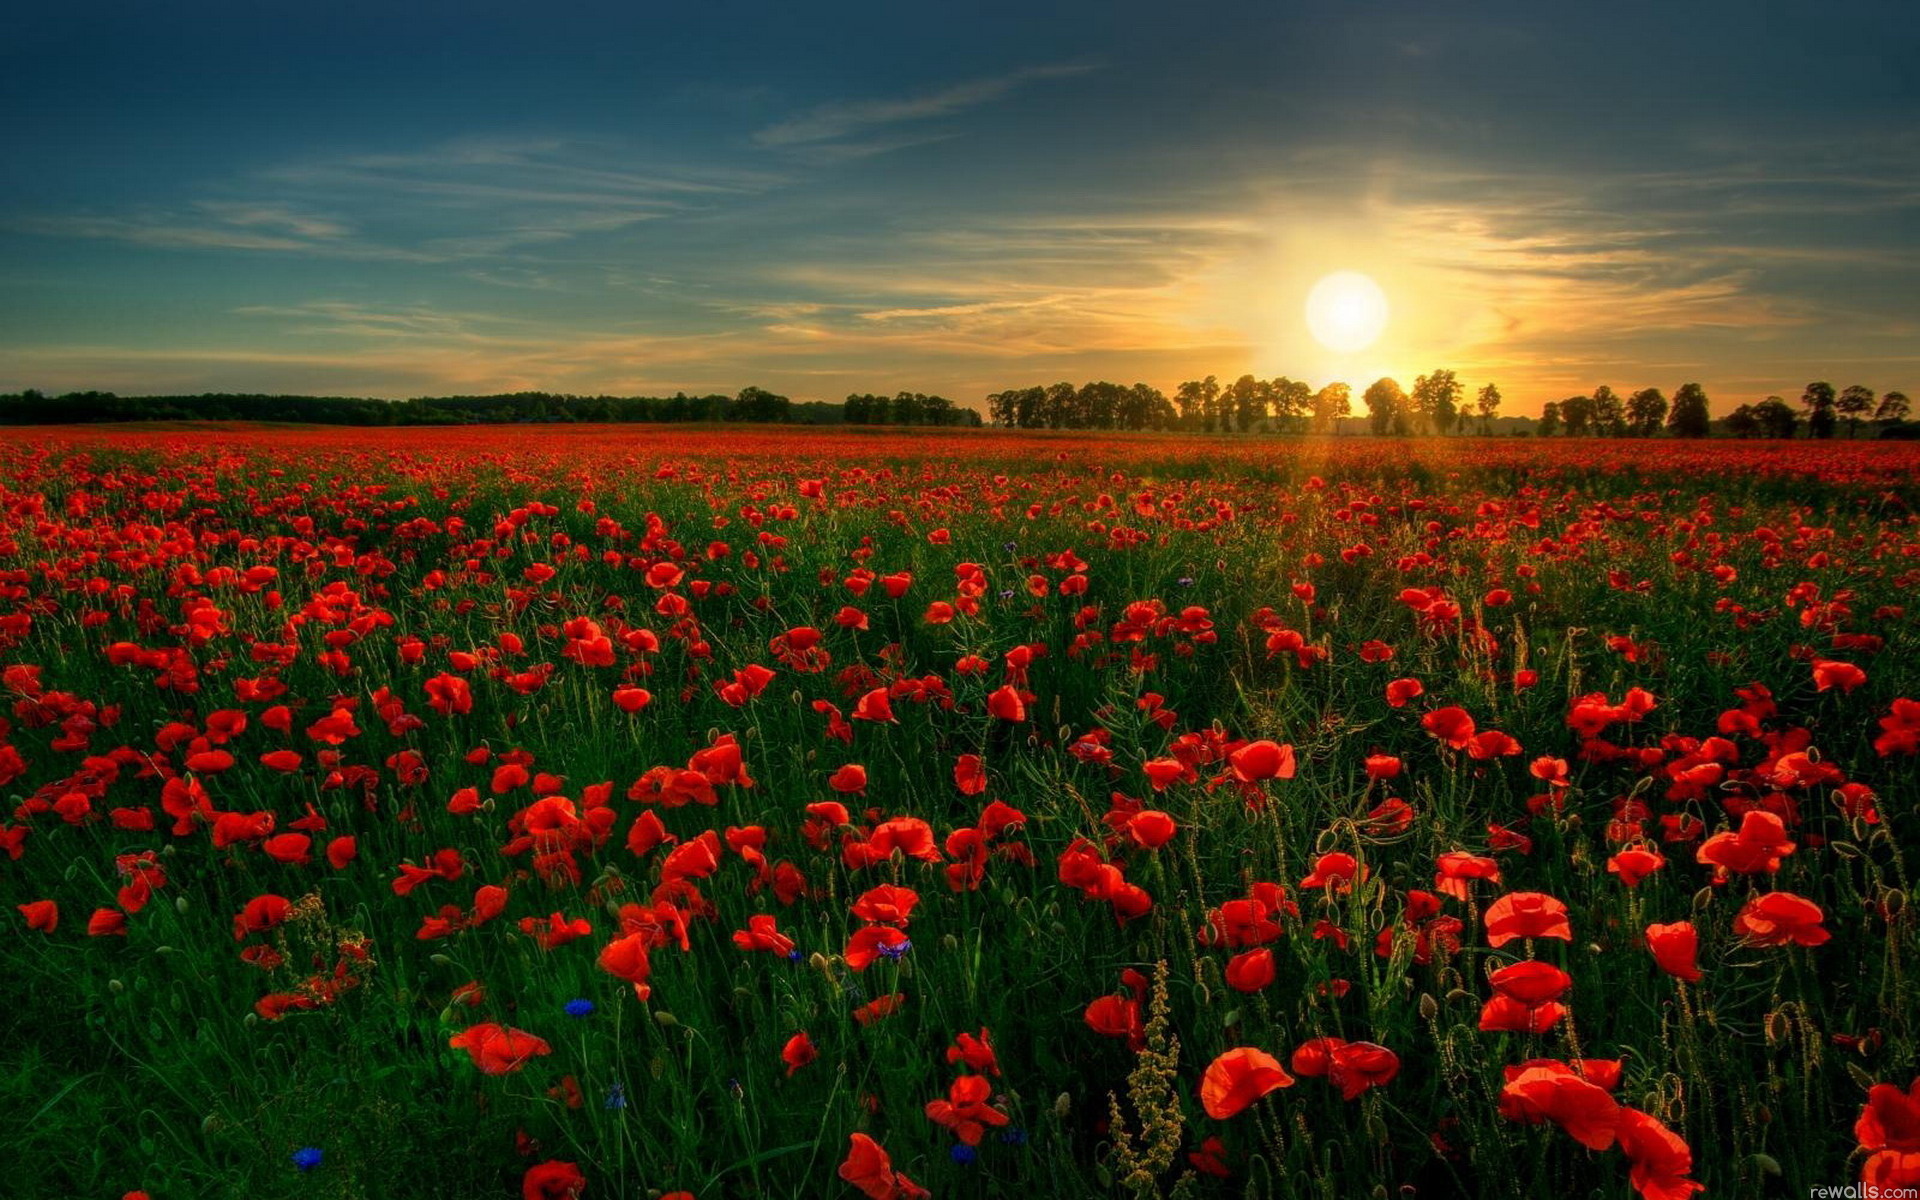 Wallpaper Of A Flower Garden Red Flowers Full In Bloom Click To